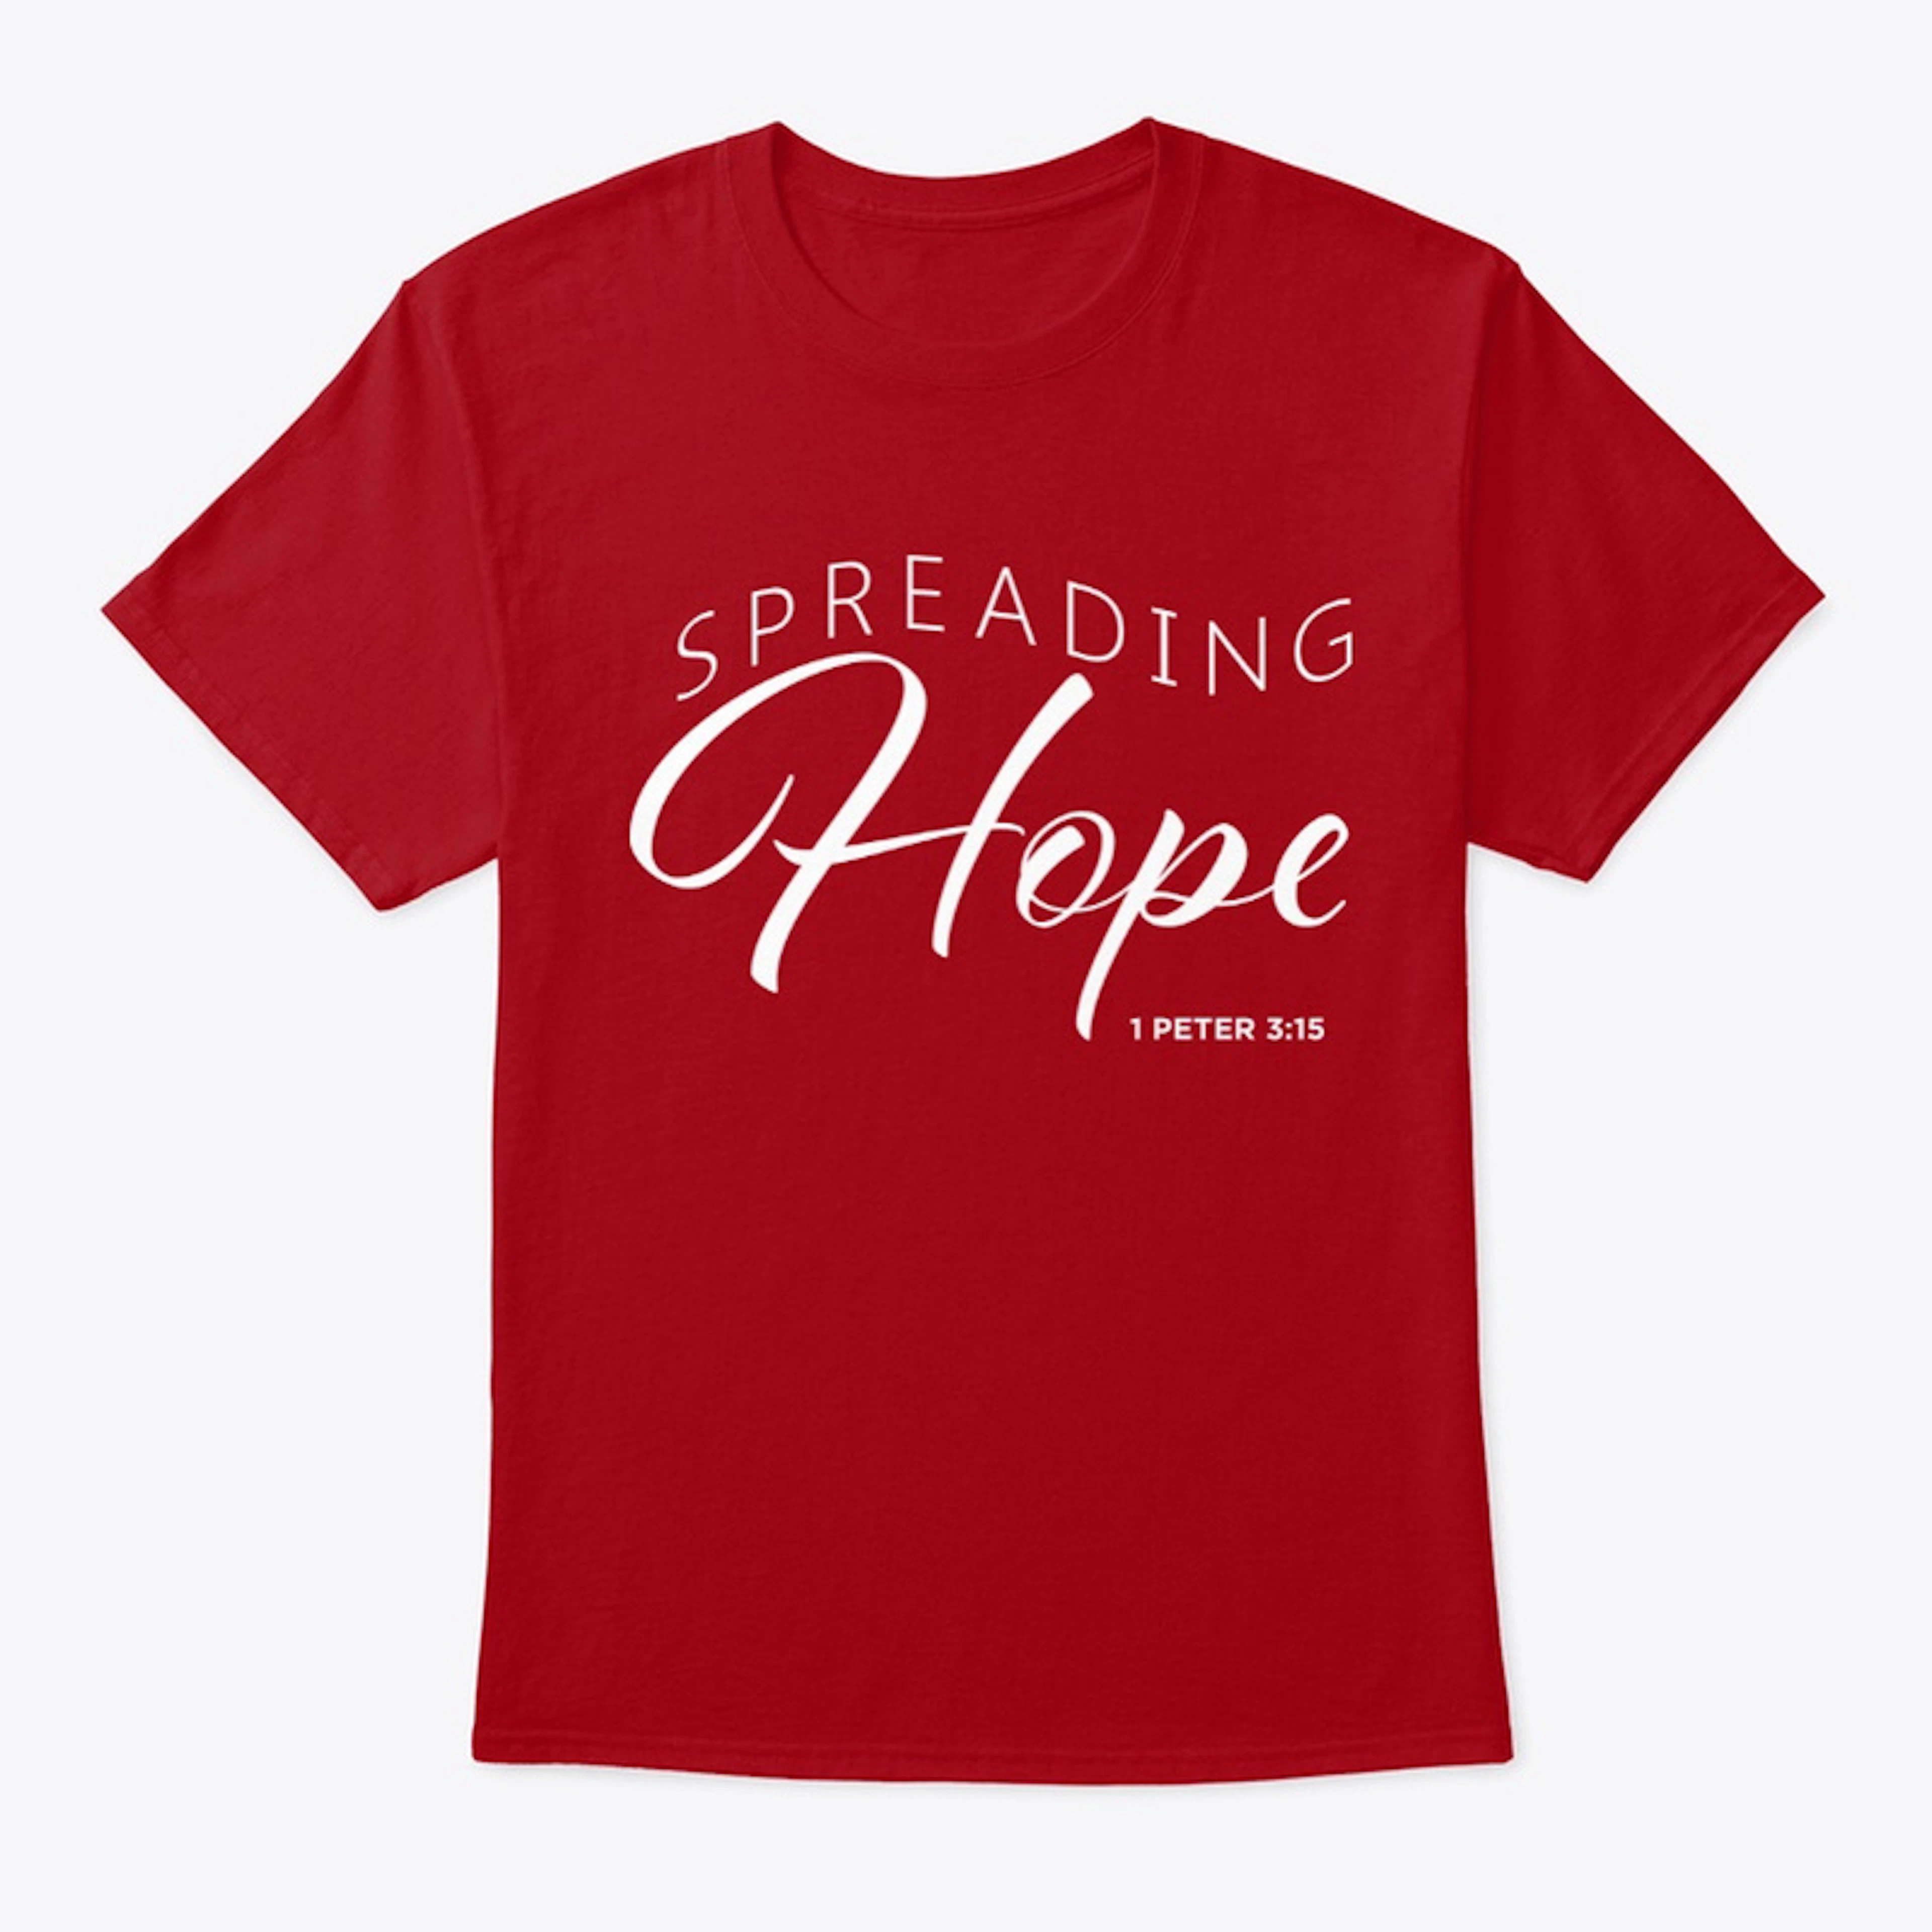 Spreading Hope 1 Peter 3:15